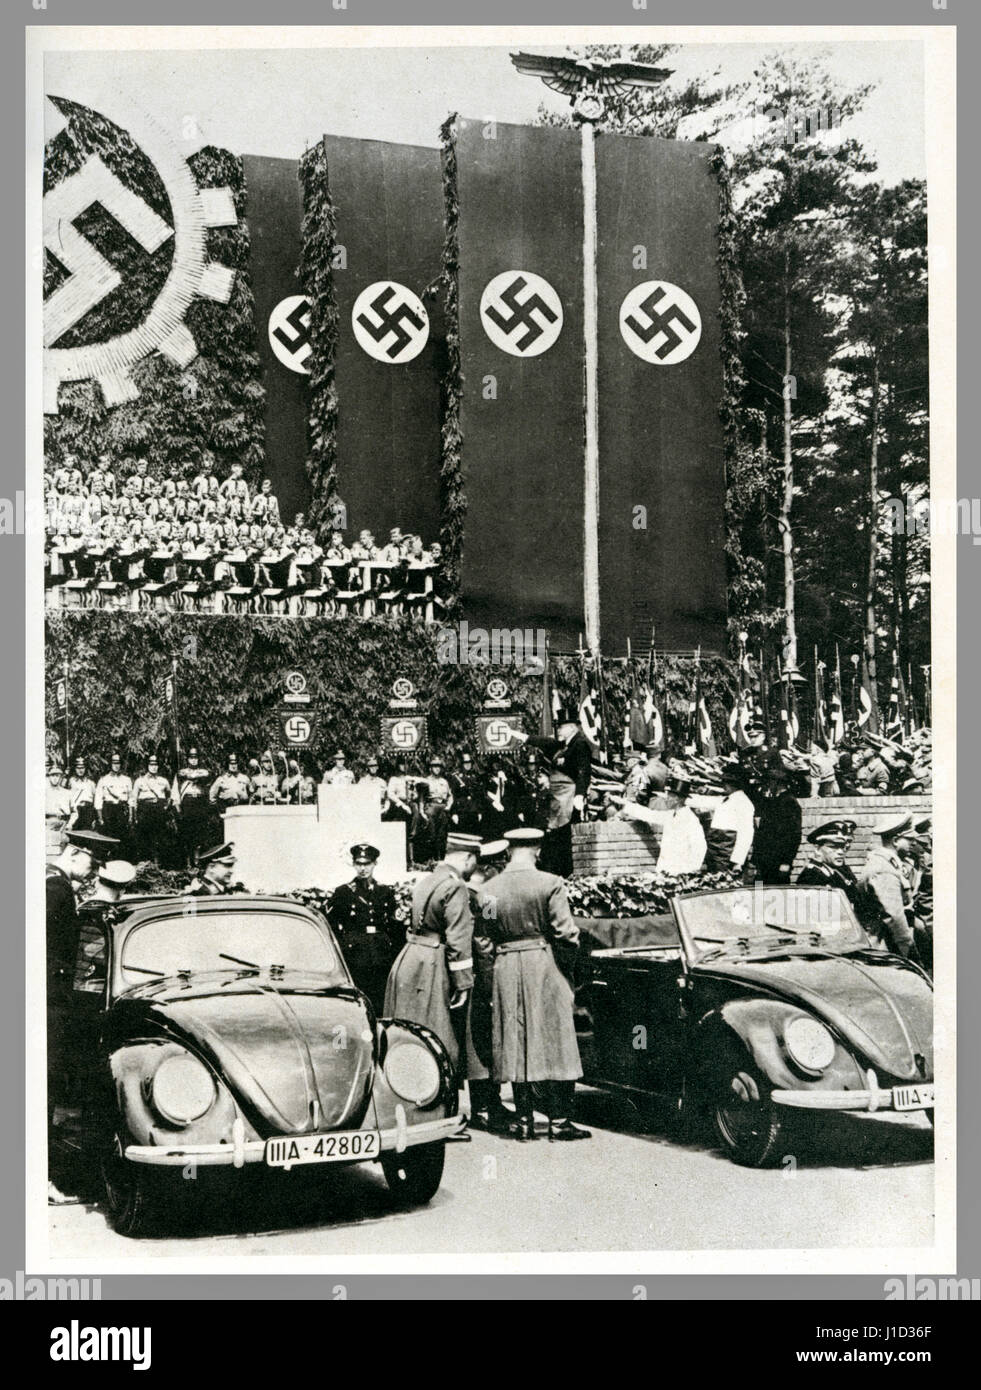 KdF -Wagen Volkswagen Launch Germany propaganda image May 26th 1938 foundation stone laying ceremony at Fallersleben Wolfsburg Volkswagen factory with new KdF -Wagen (strength through joy) cars on display under Nazi Swastika flags Stock Photo